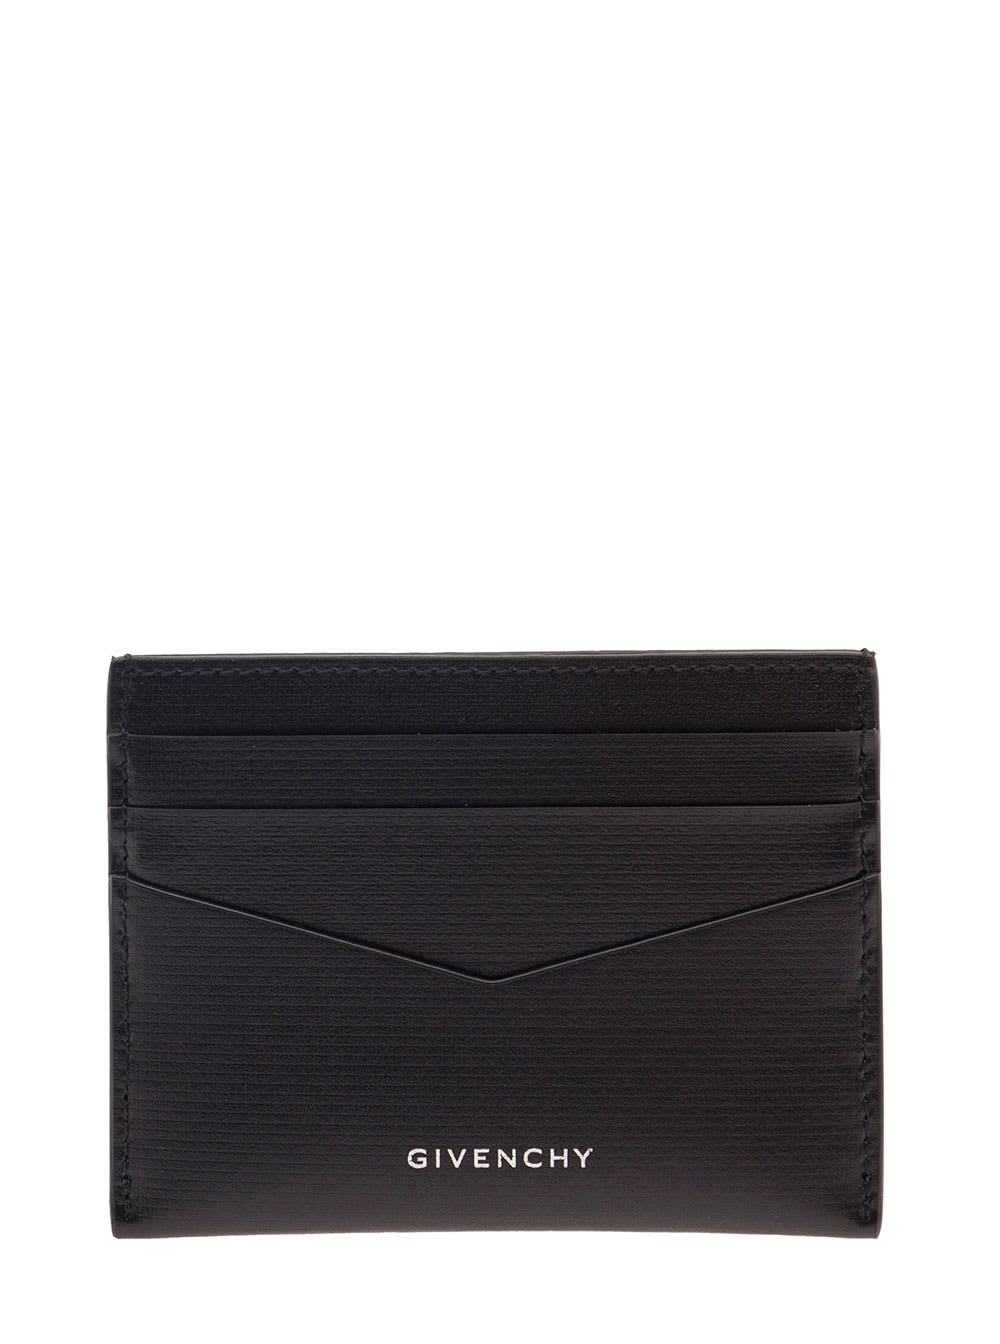 Black Cardholder With Silver Logo Embossed At The Front In Leather Man